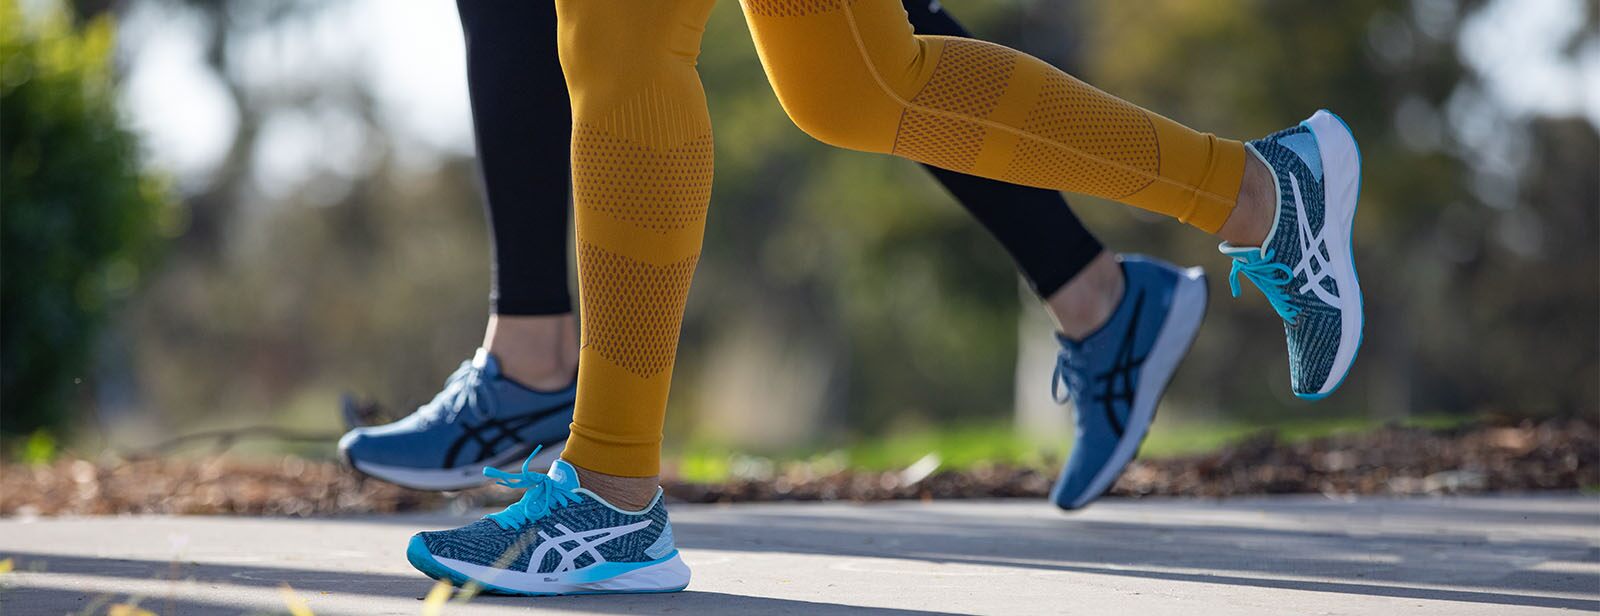 Tips On How To Choose the Right Running Shoes for You